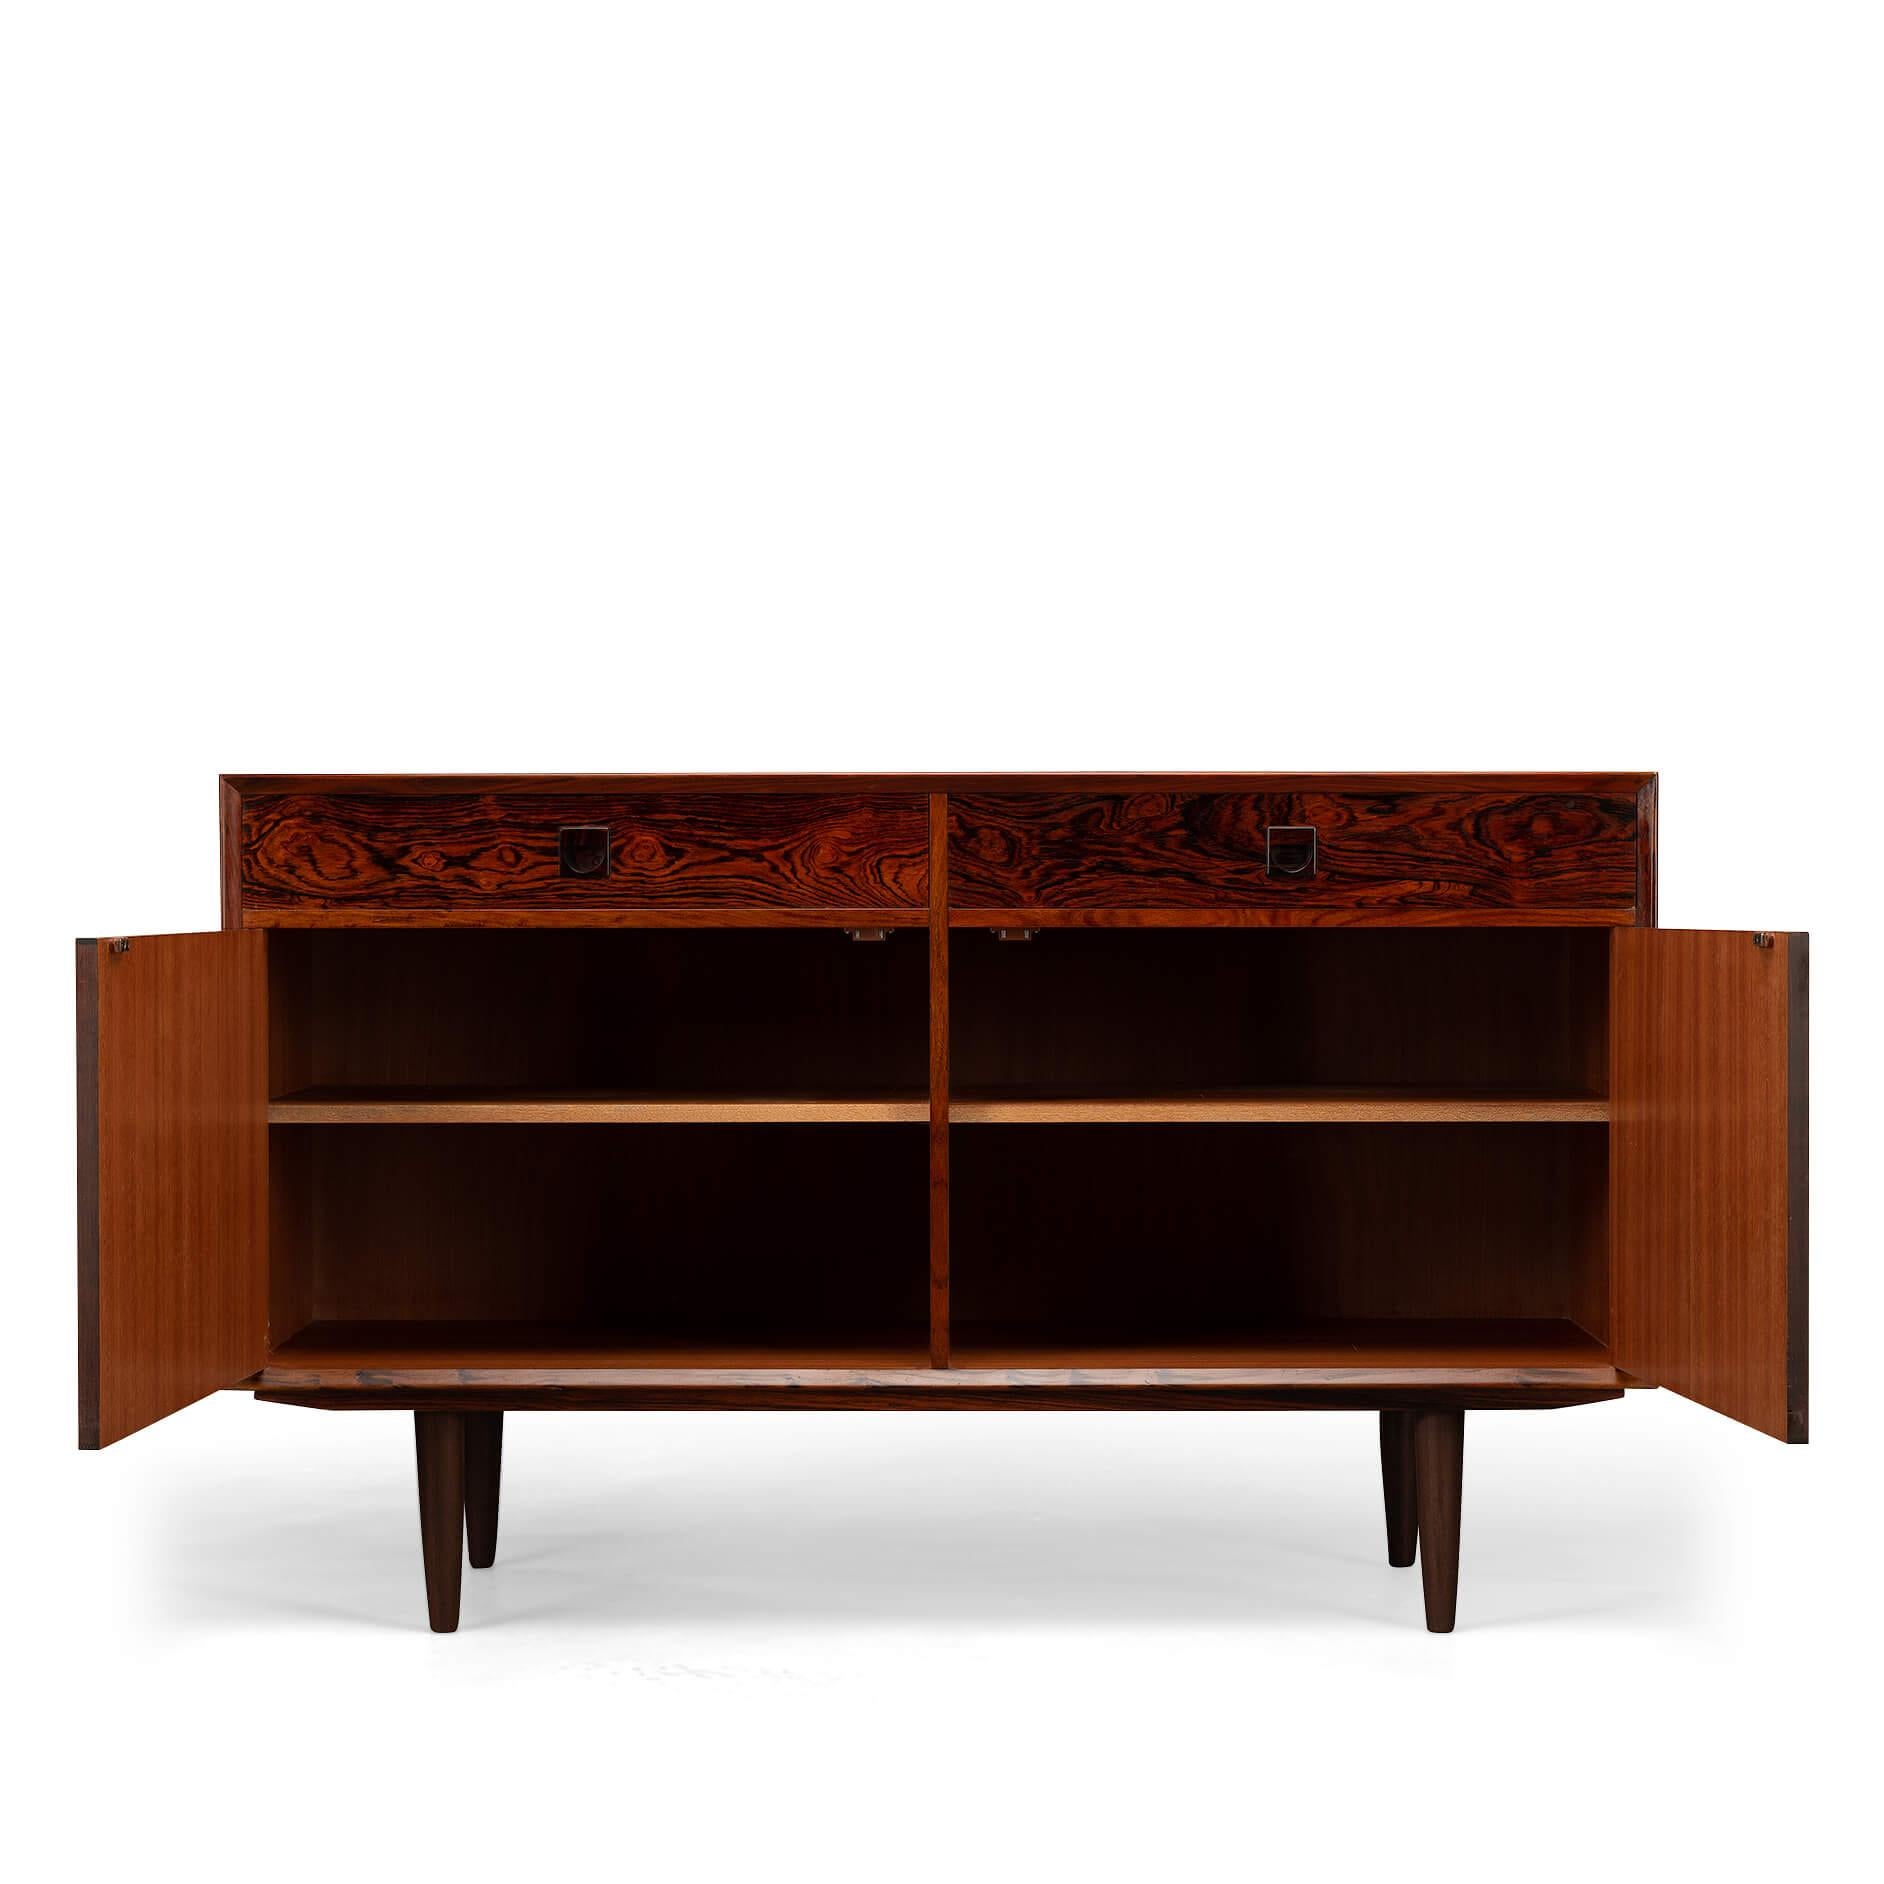 Small rosewood sideboard designed by E. Brouer and manufactured by Brouer Møbelfabrik. The expressive print of the rosewood on the doors is gorgeous! An eye-catcher in every hallway, study or living! This sideboard has a top layer of two drawers